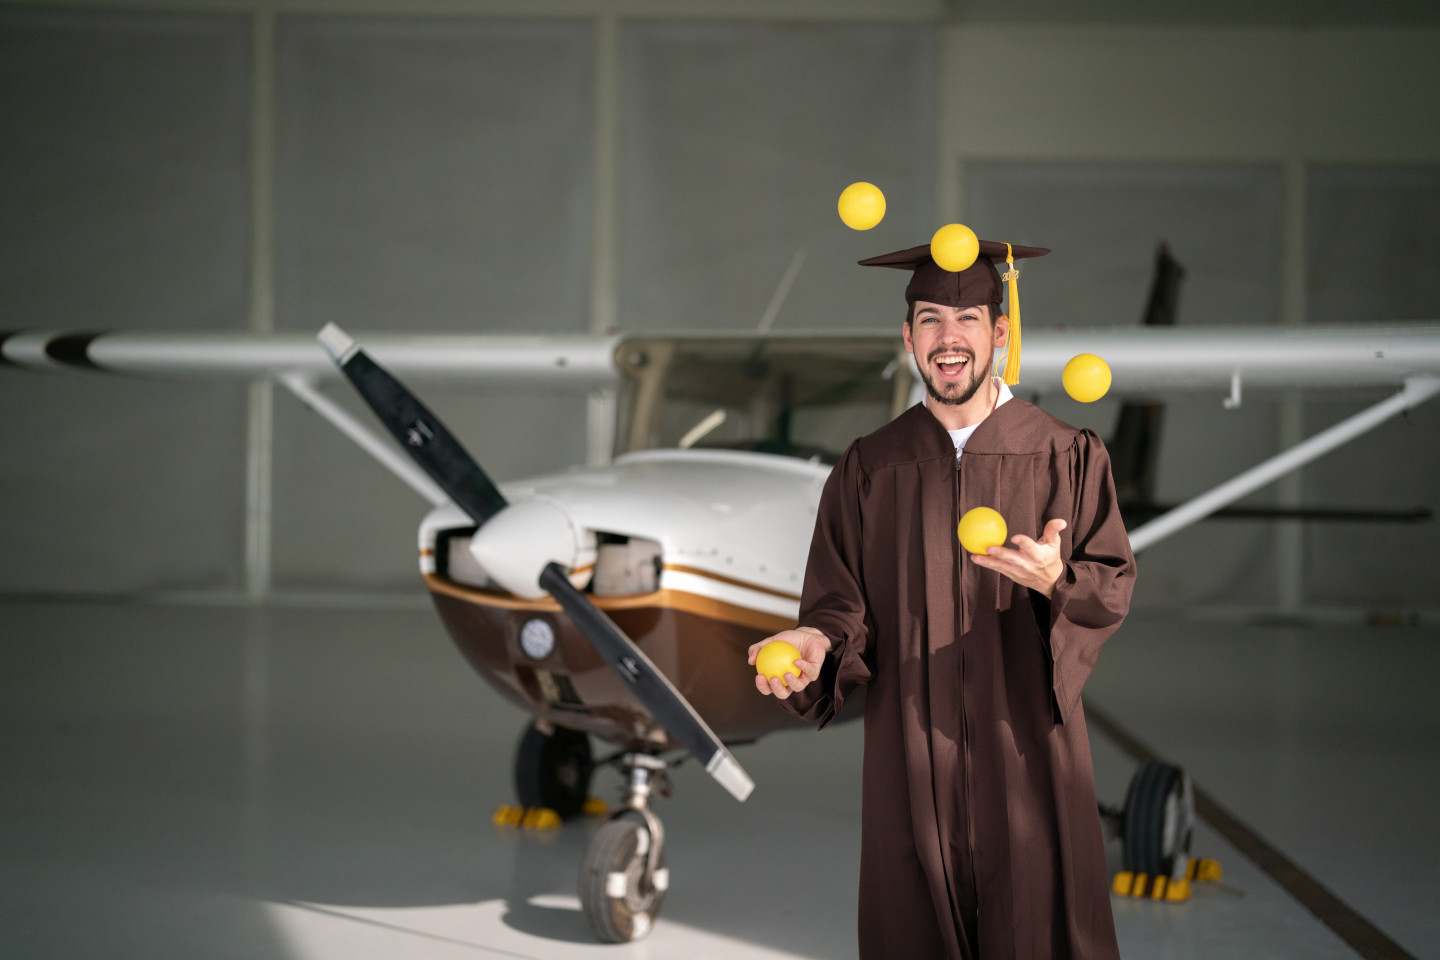 Kyle Albrecht juggles five balls while standing in front of an airplane.